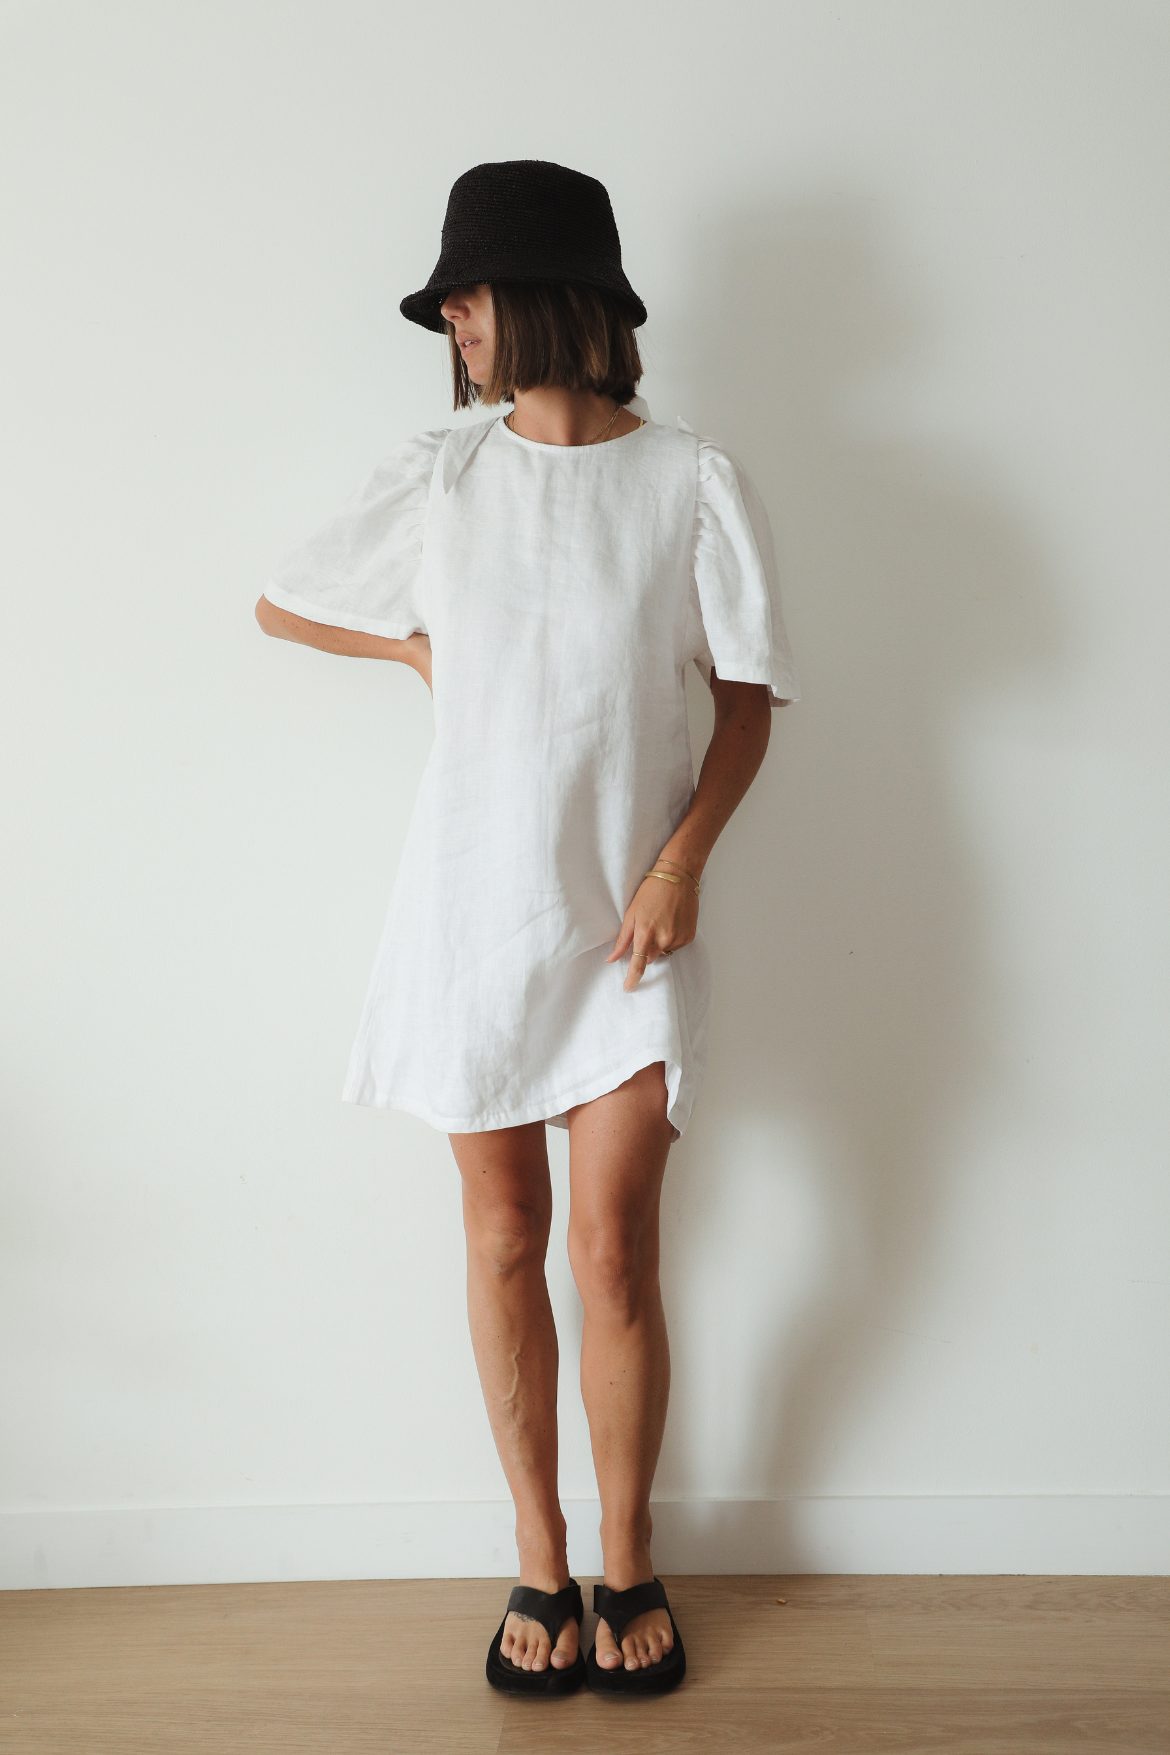 The Ease Florence Mini Dress - White linen mini dress with exaggerated sleeve and tie back